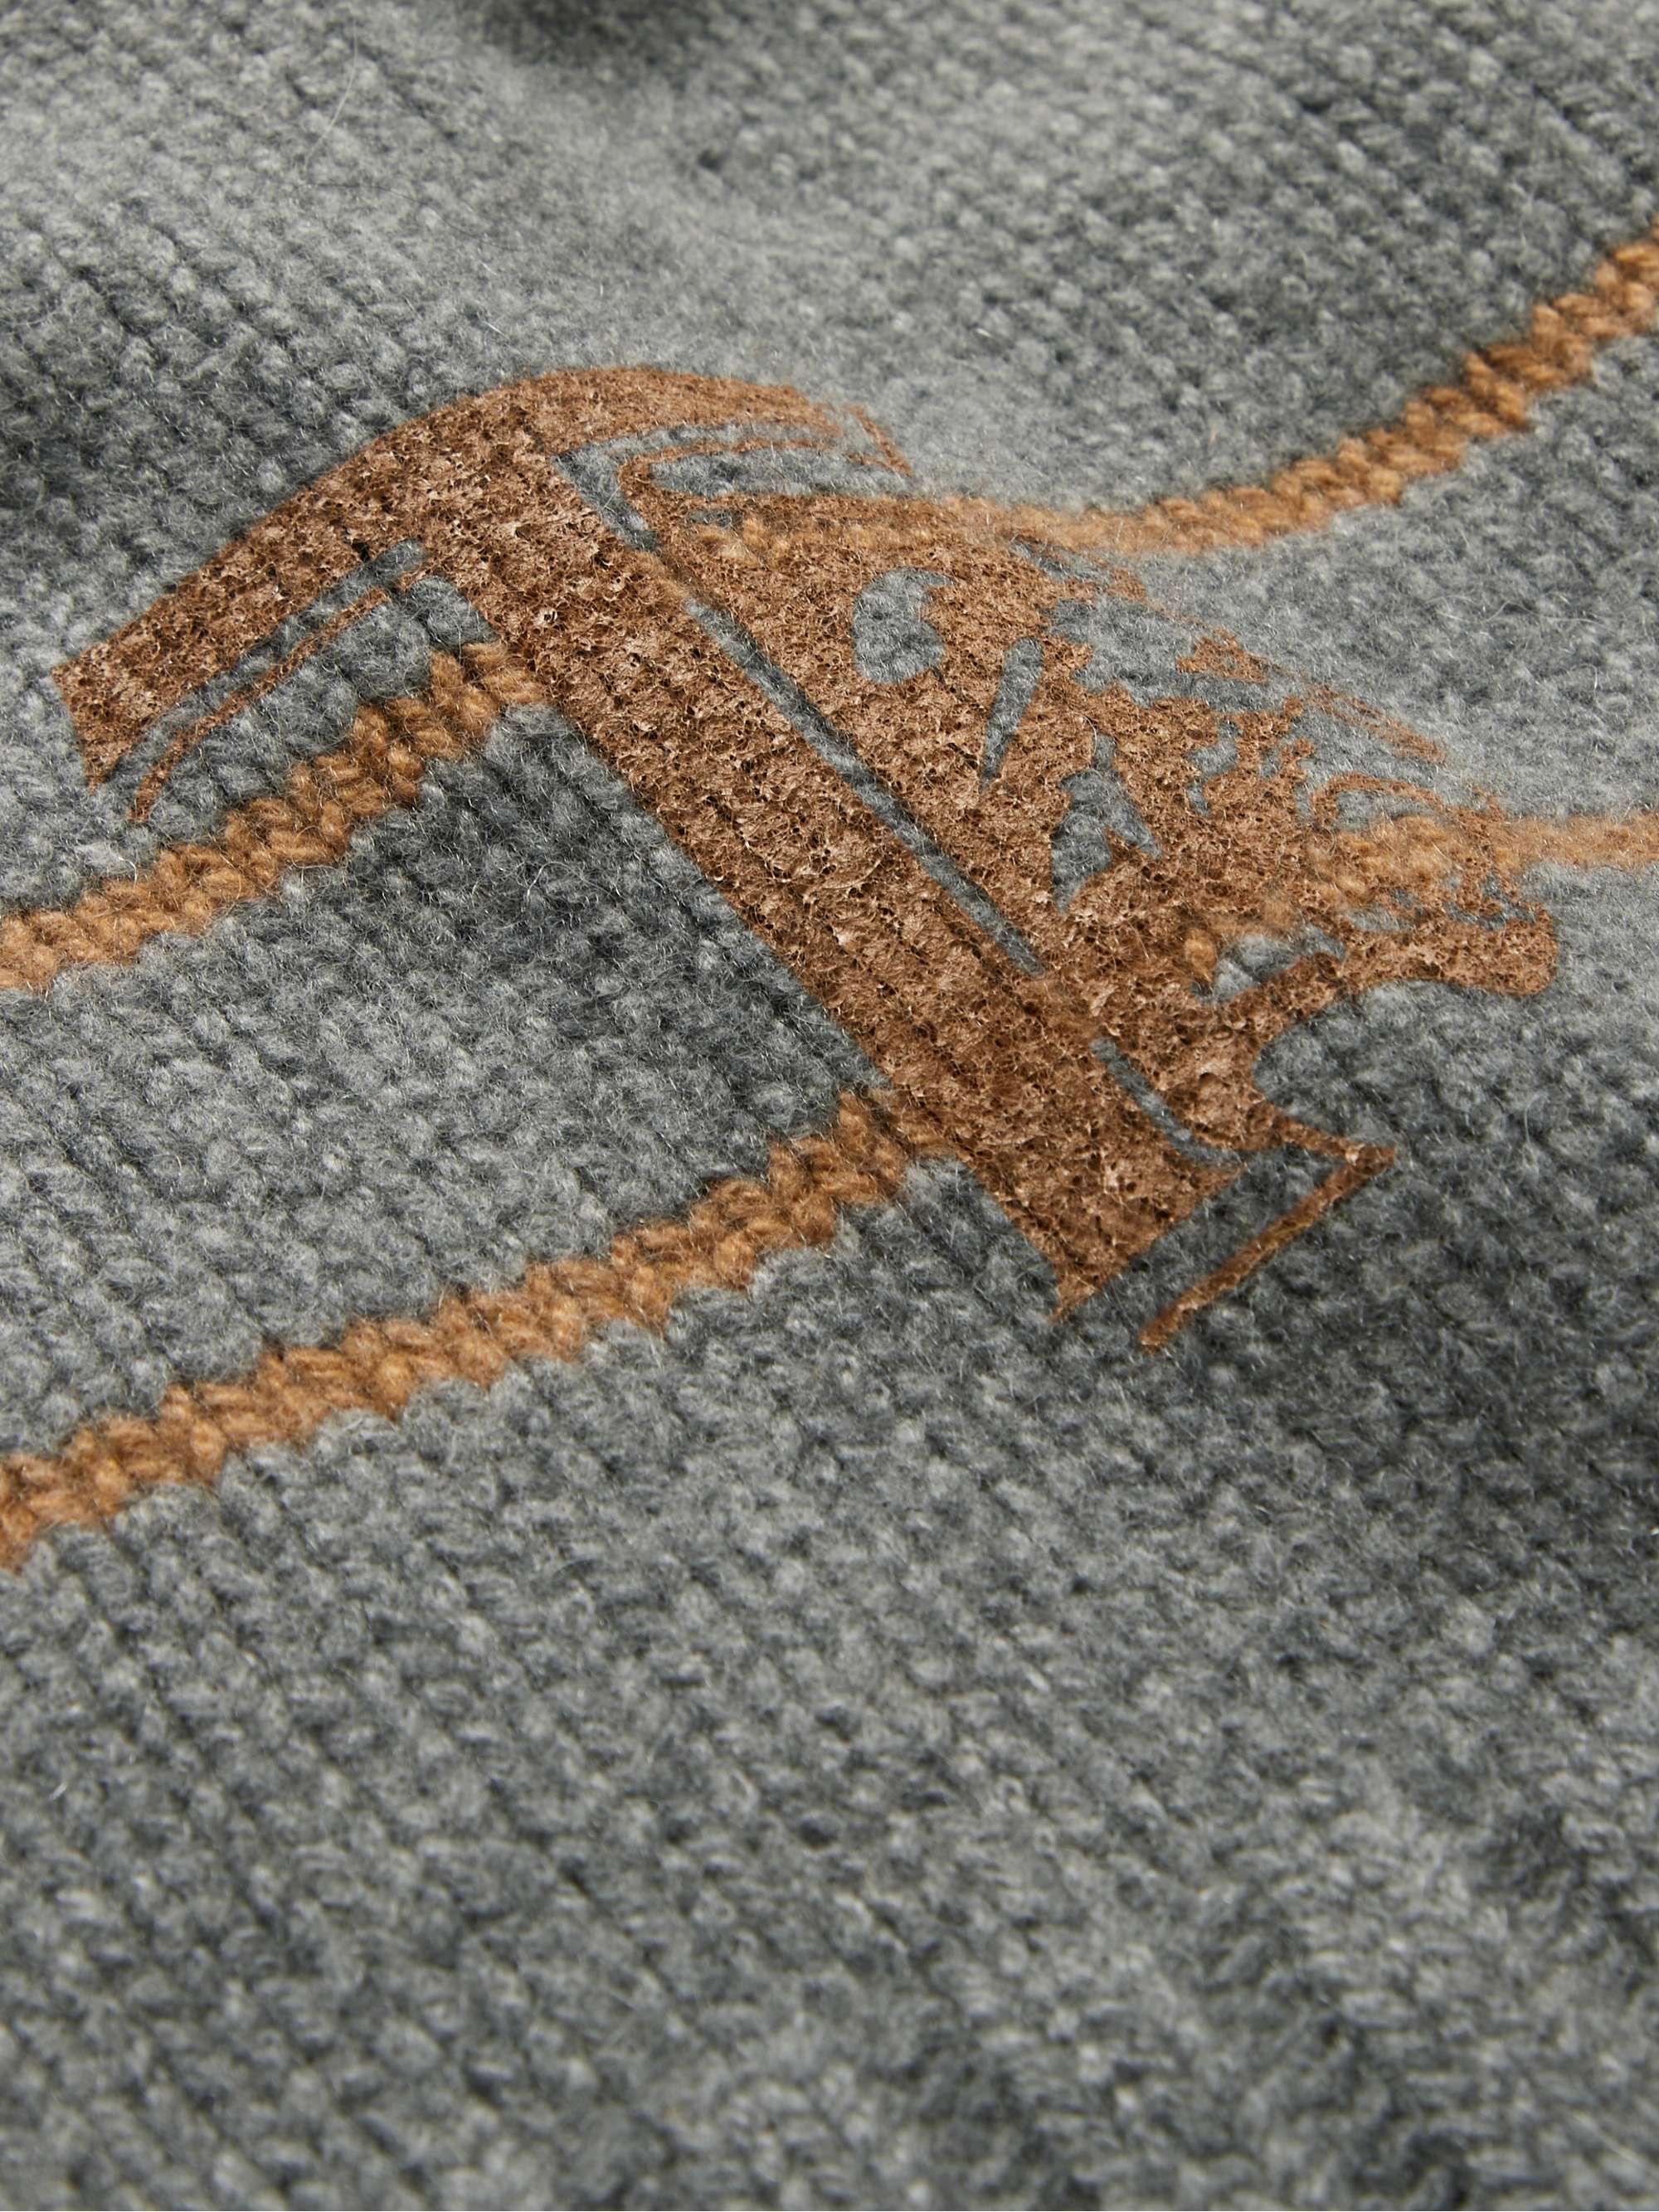 TOD'S Logo-Intarsia Cashmere and Wool-Blend Cardigan